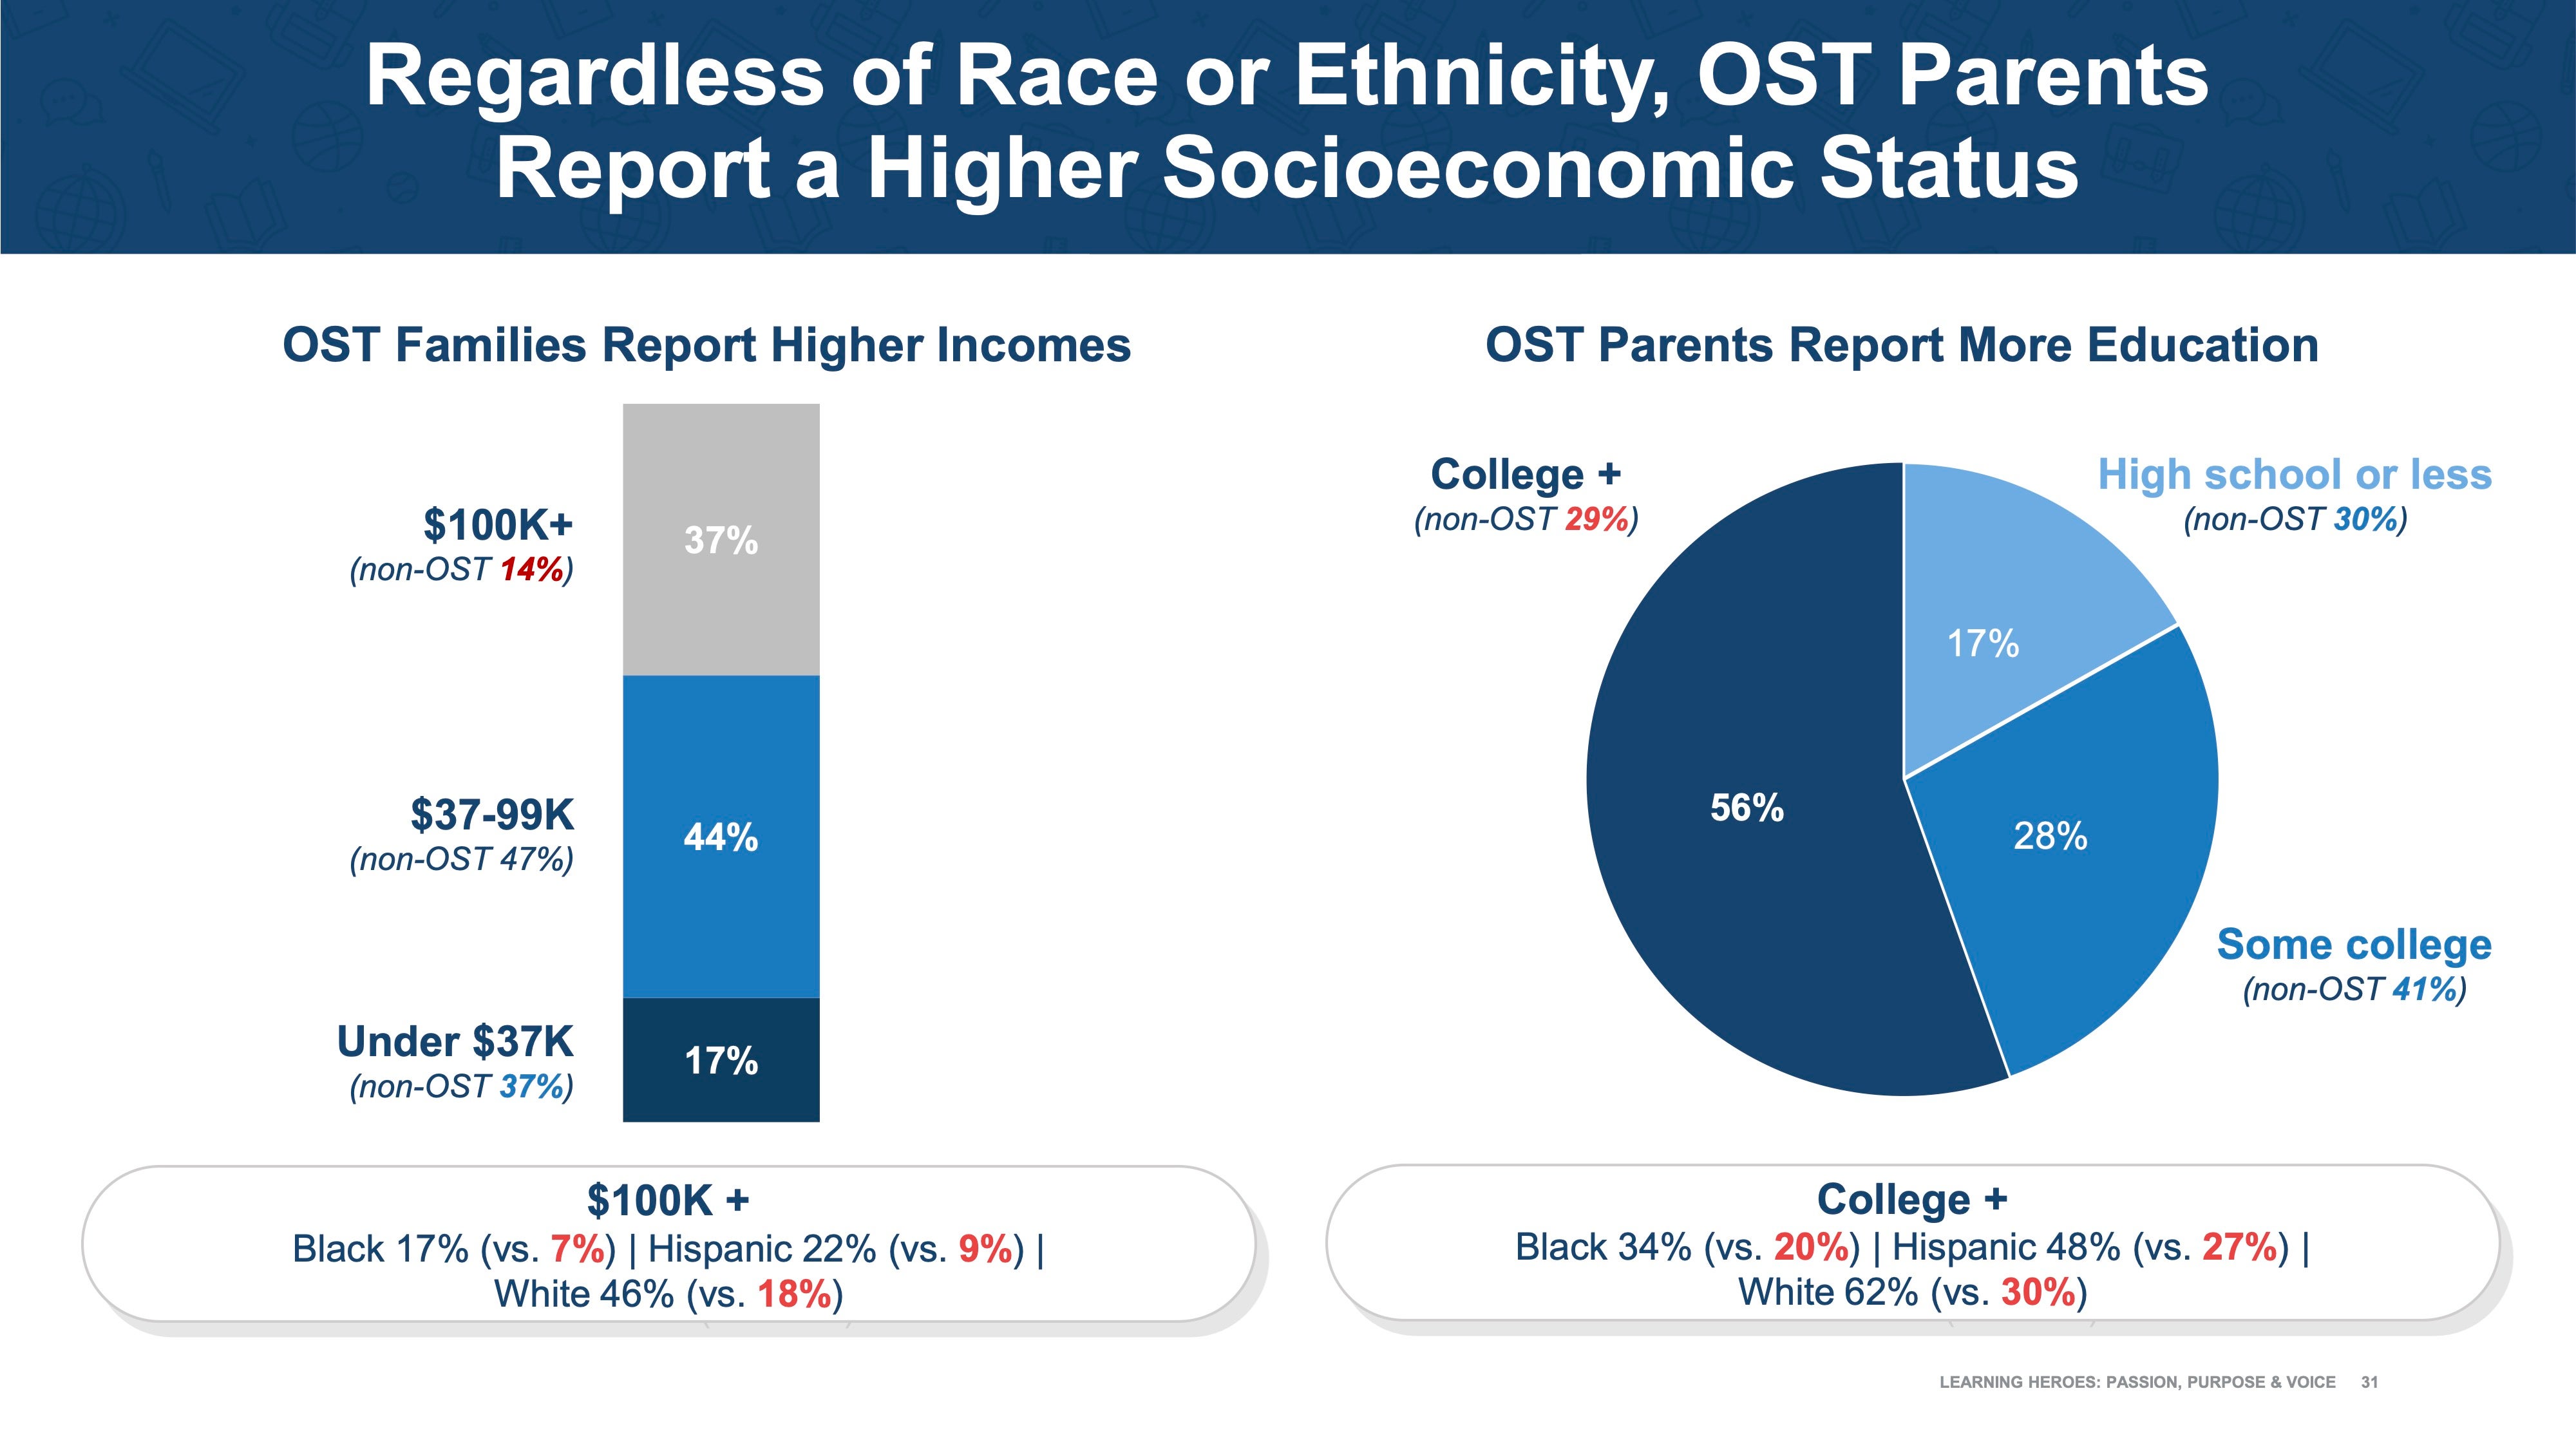 A bar graph shows OST families report higher incomes. A pie chart shows OST parents report more education.